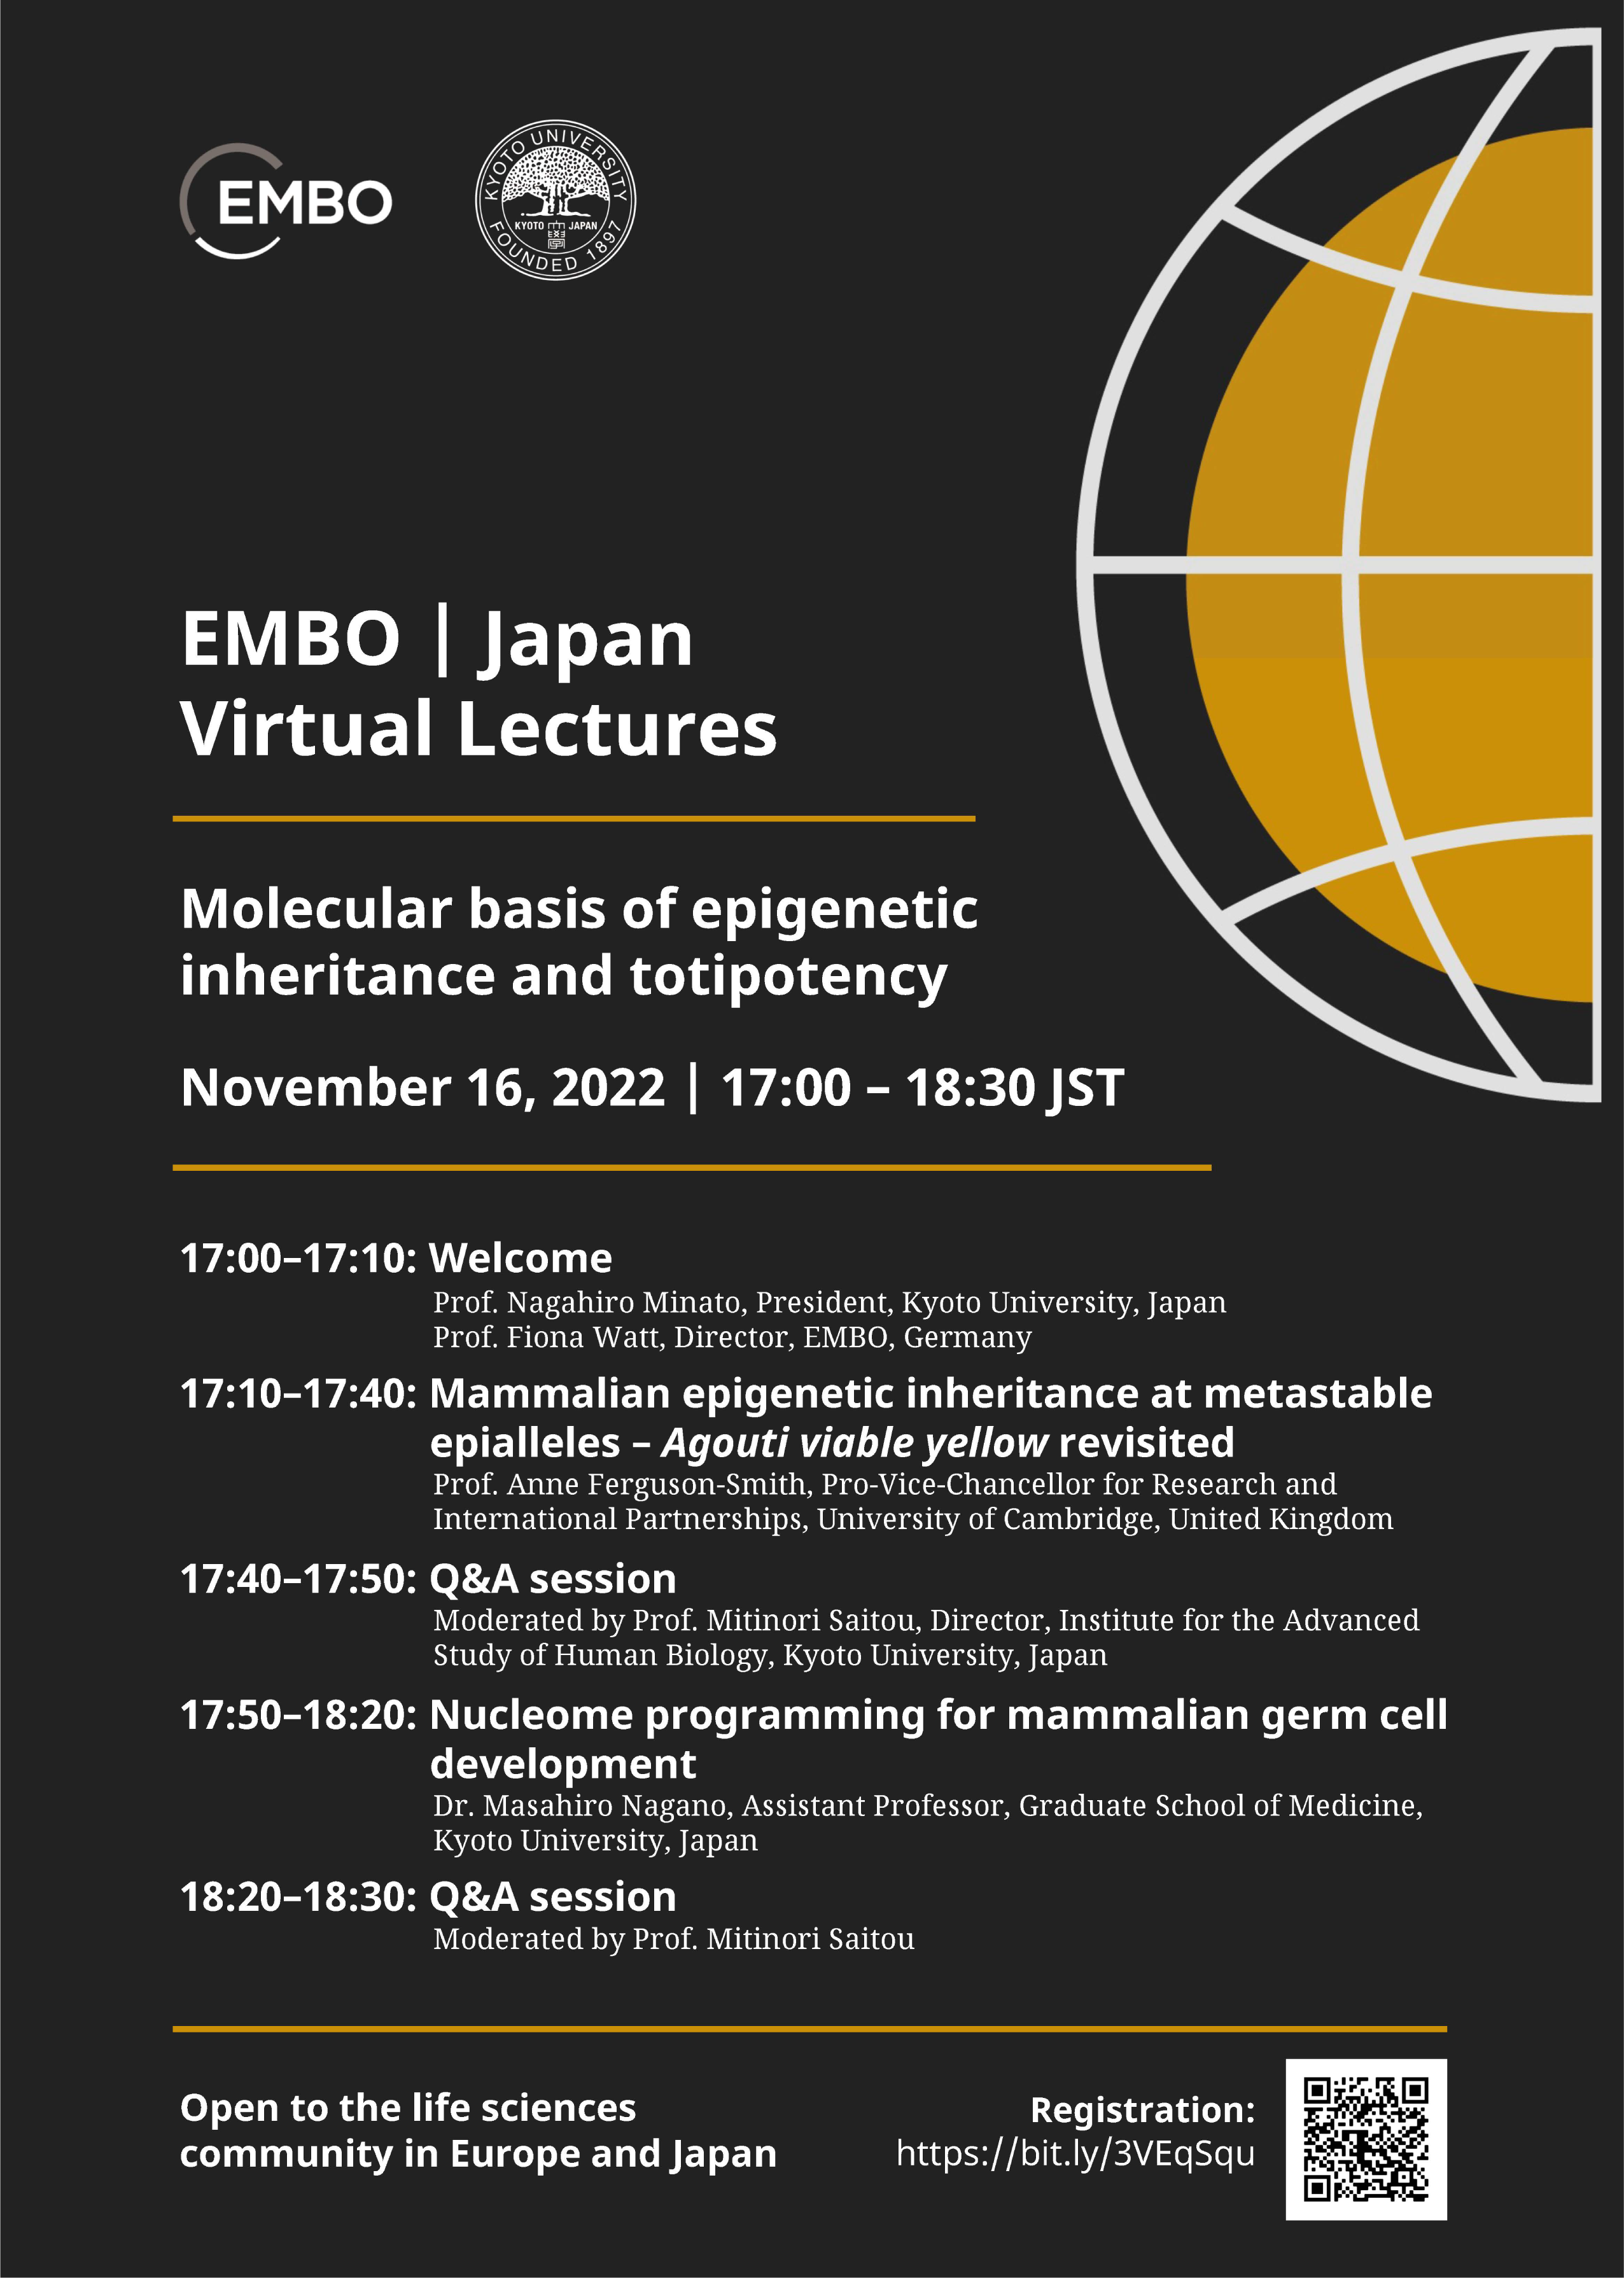 EMBO | Japan Virtual Lectures will be held on November 16